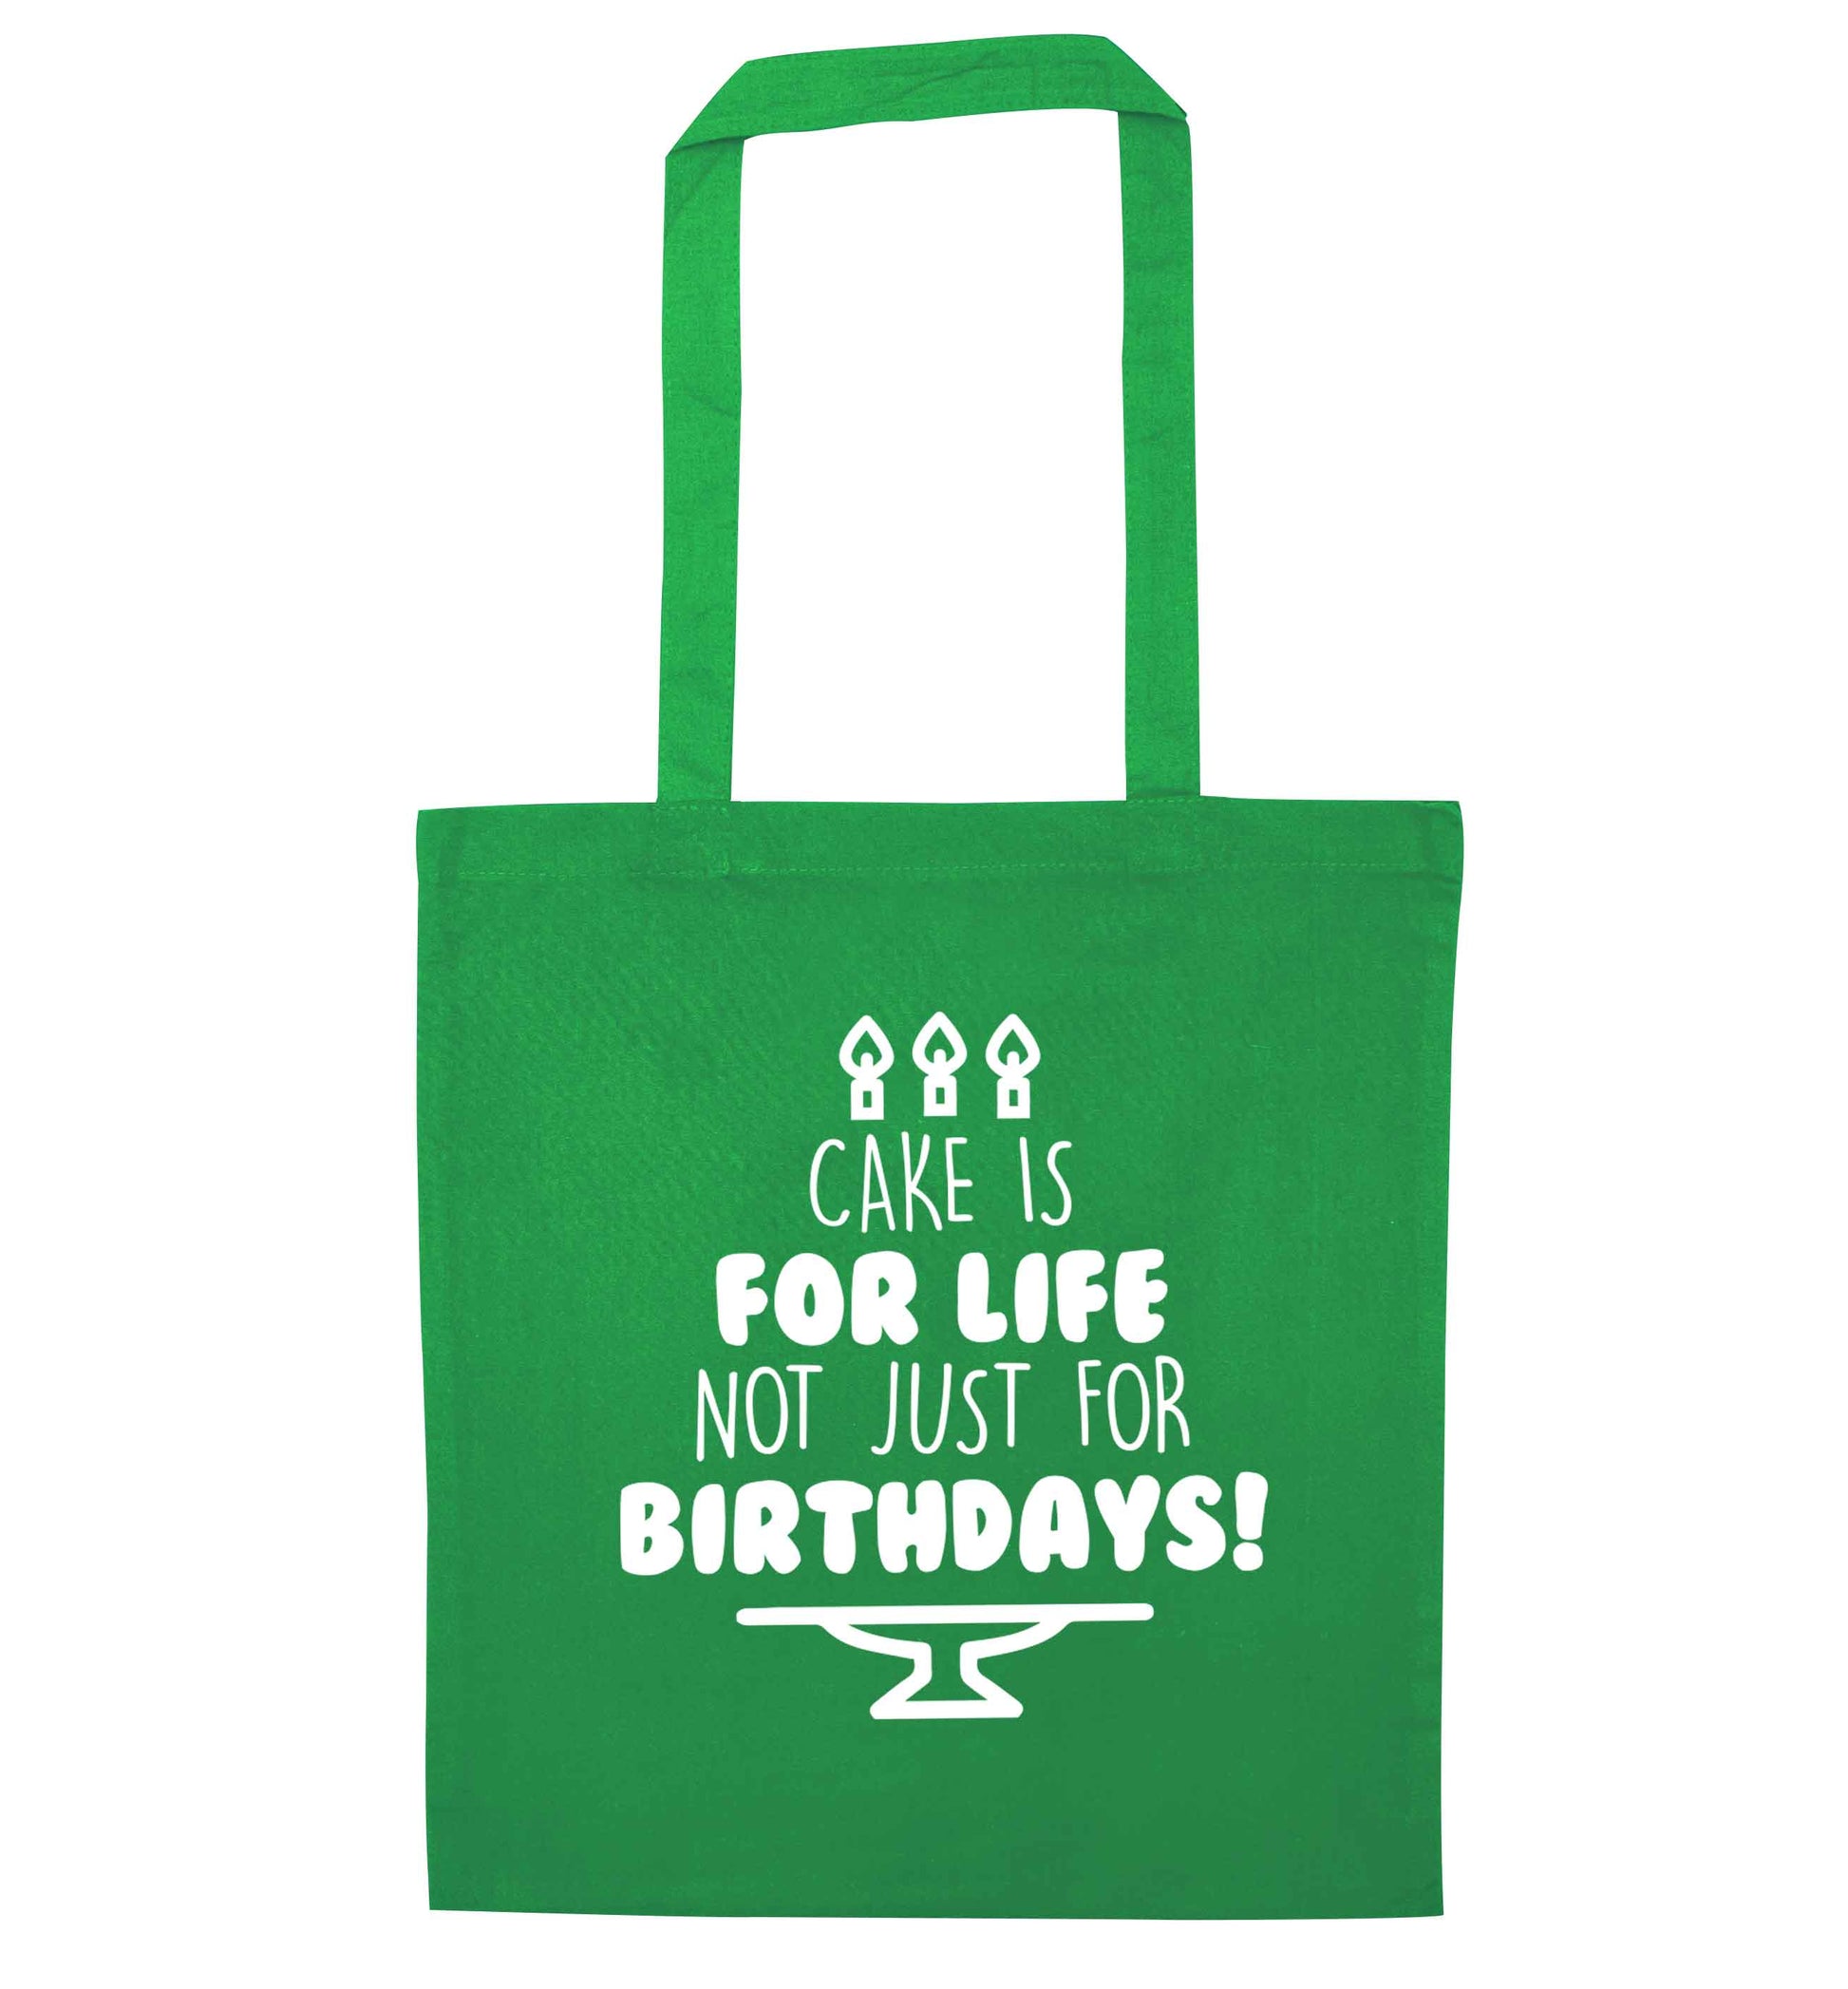 Cake is for life not just for birthdays green tote bag